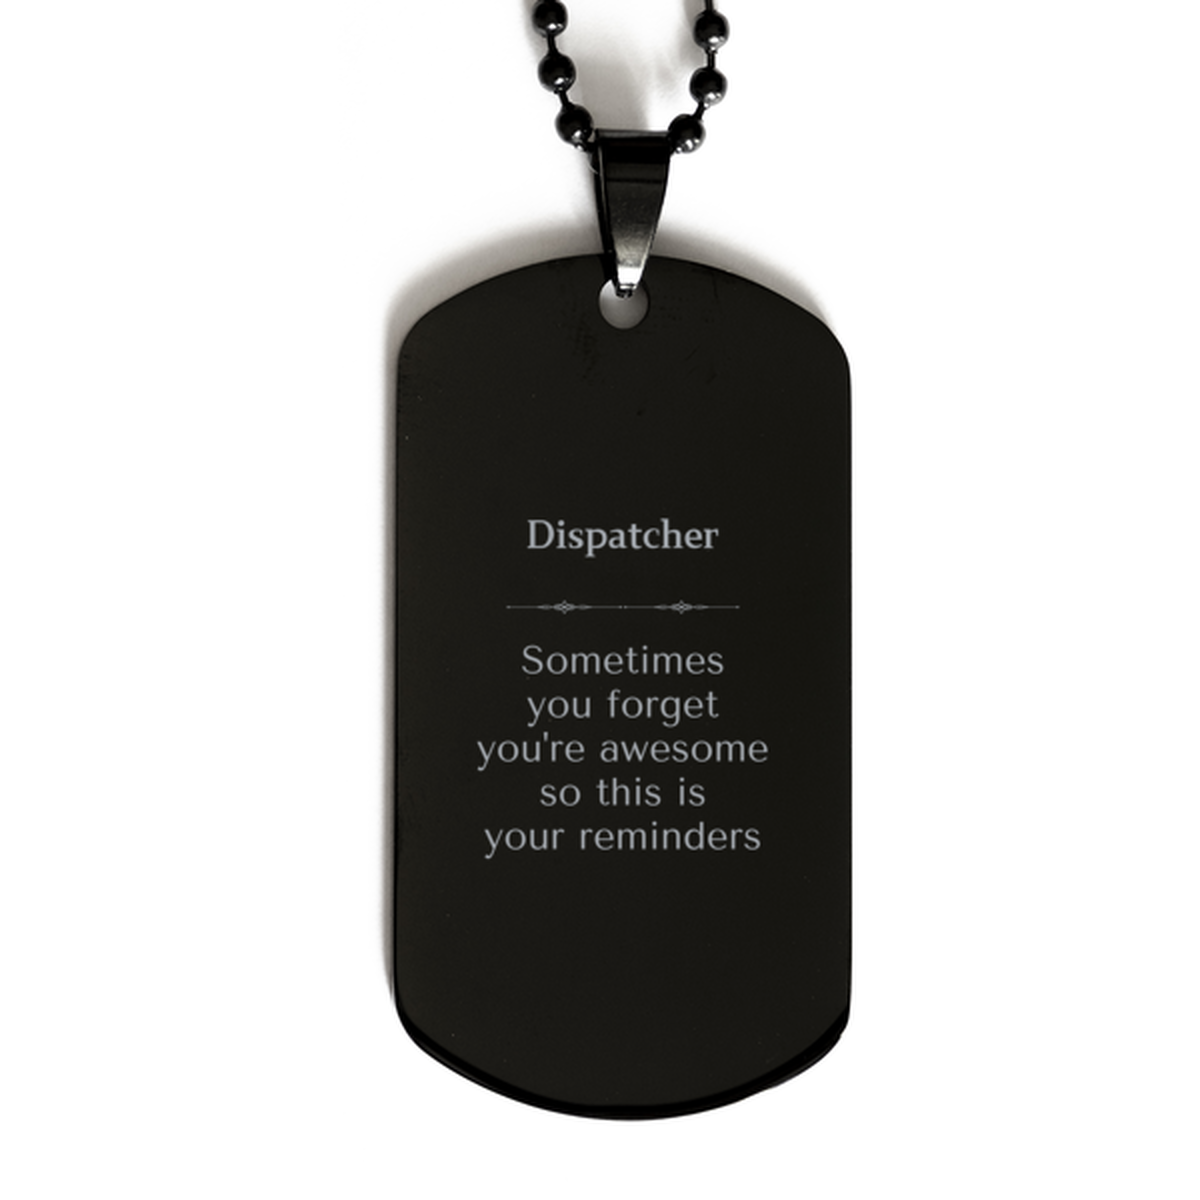 Sentimental Dispatcher Black Dog Tag, Dispatcher Sometimes you forget you're awesome so this is your reminders, Graduation Christmas Birthday Gifts for Dispatcher, Men, Women, Coworkers